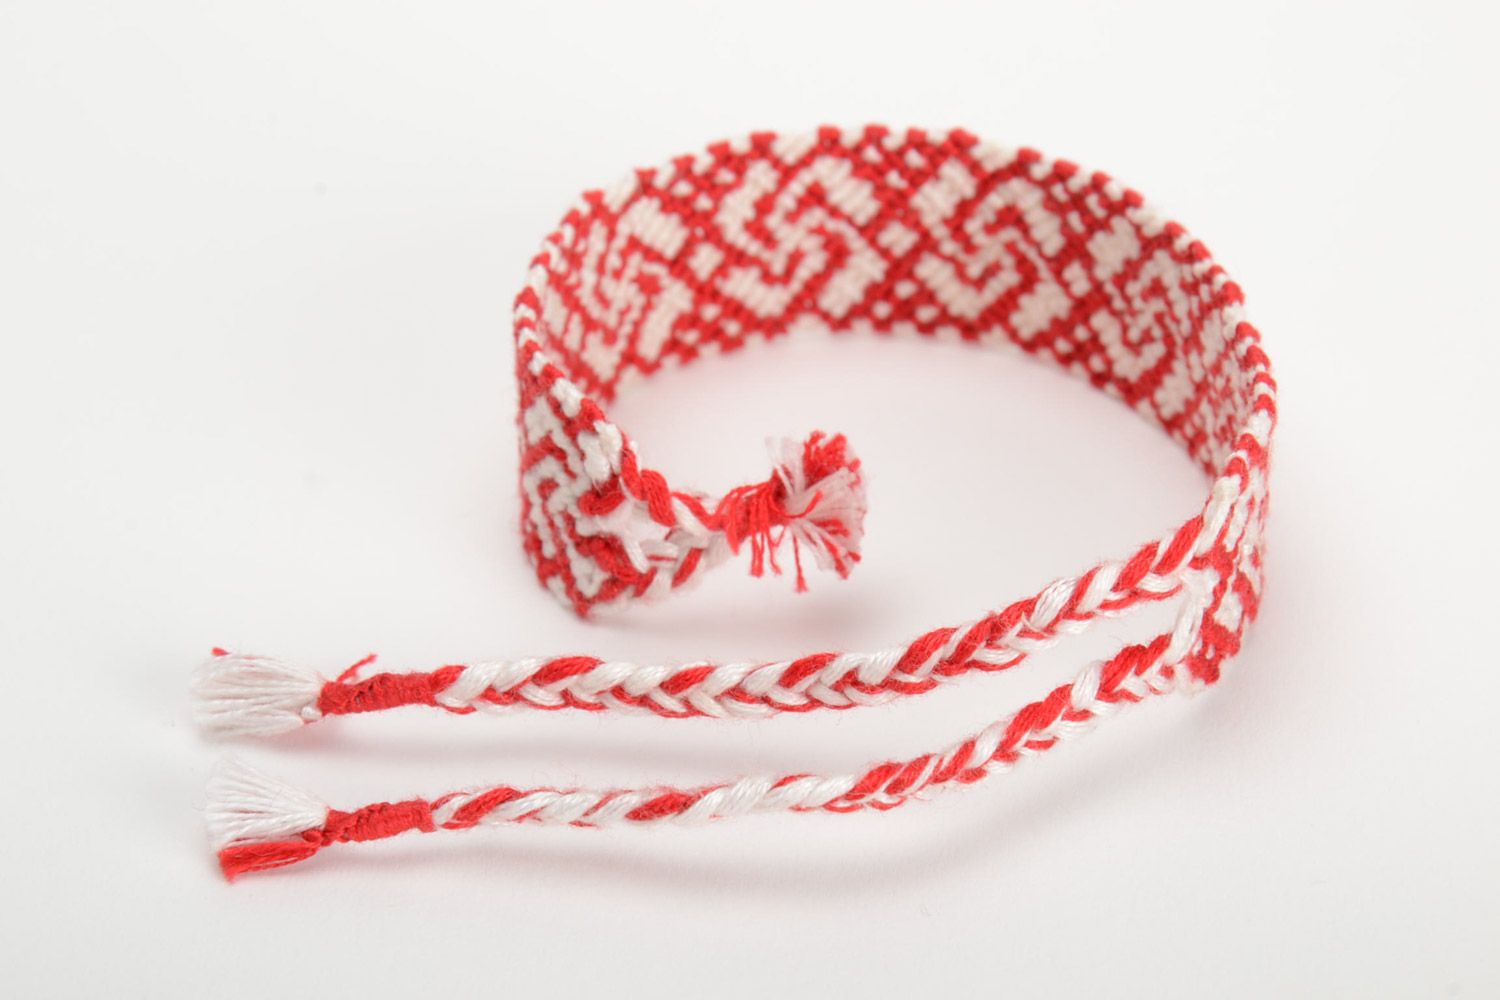 Handmade ethnic friendship wrist bracelet woven of red and white threads photo 3